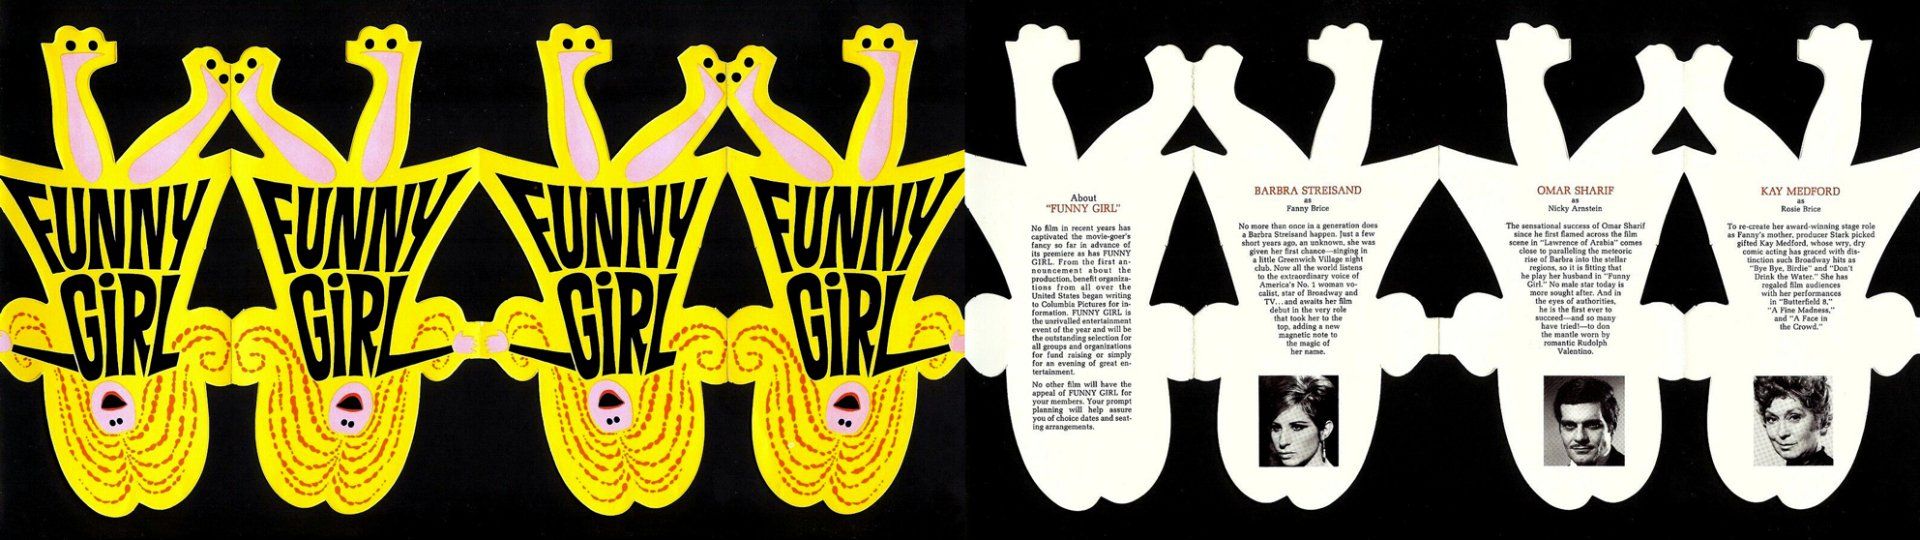 Funny Girl paper dolls, advertising the movie.